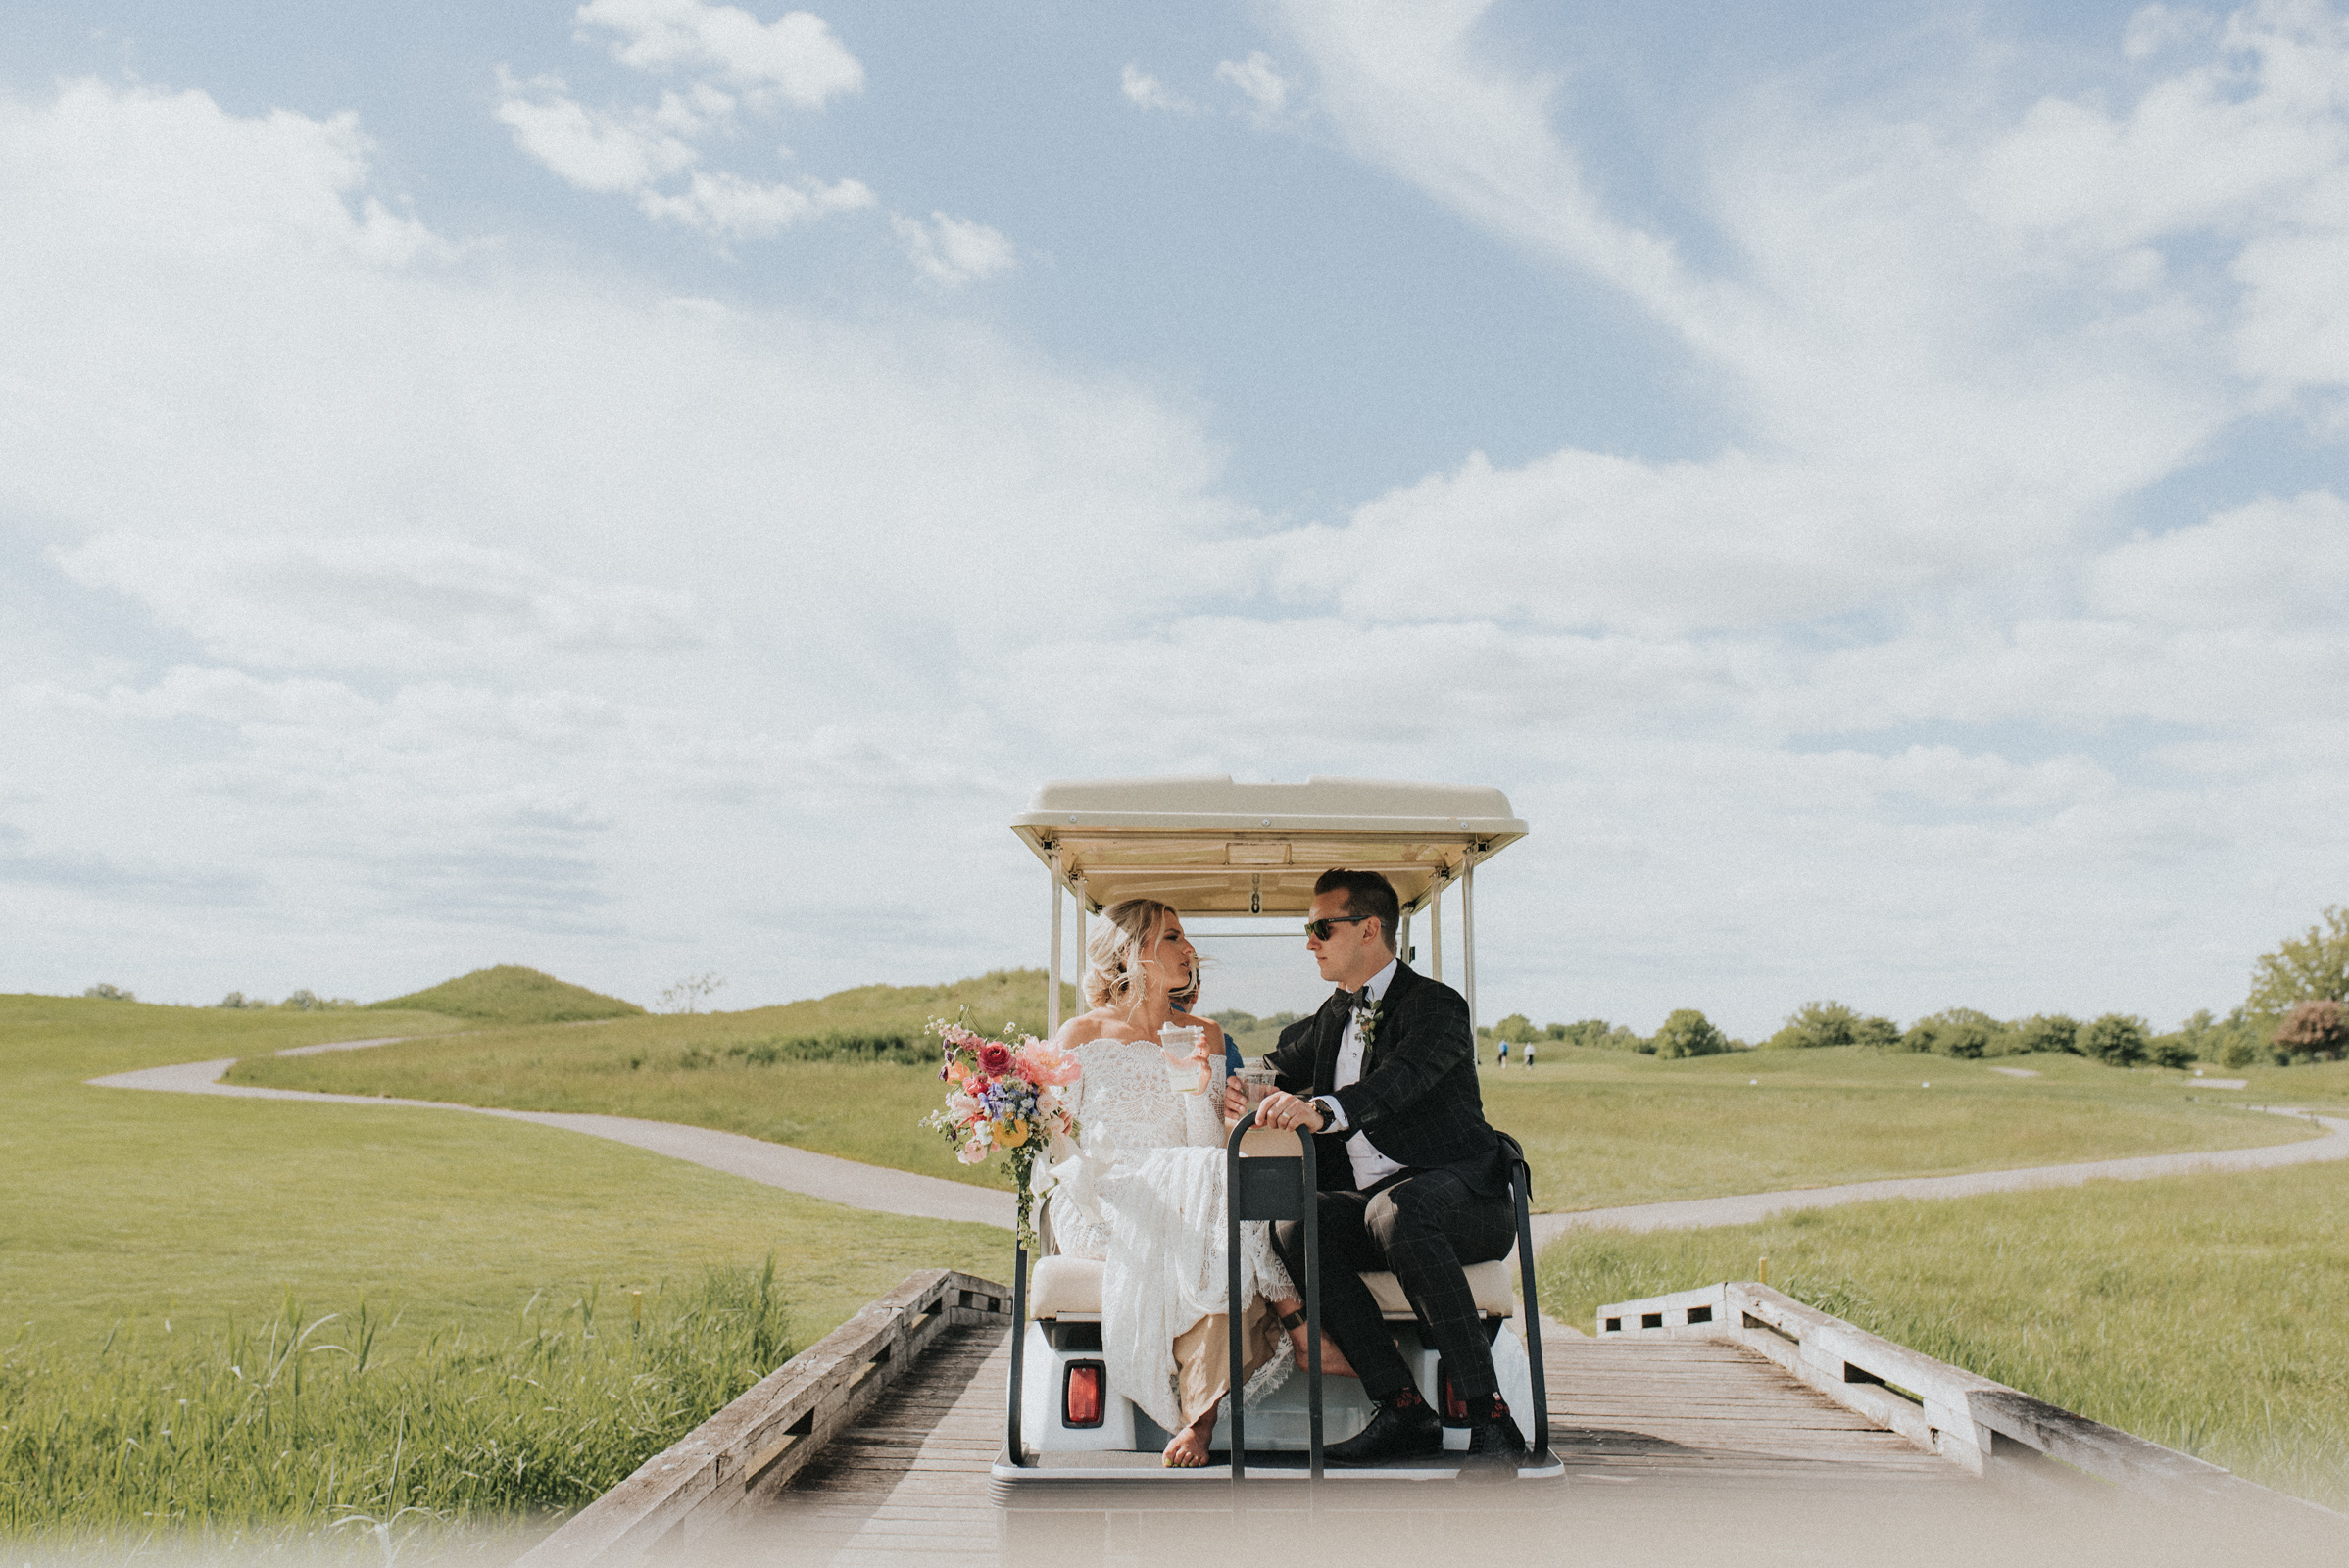 Couple riding in a Golf cart on their wedding day with the greens of Piper's Heath Golf Club in the background.